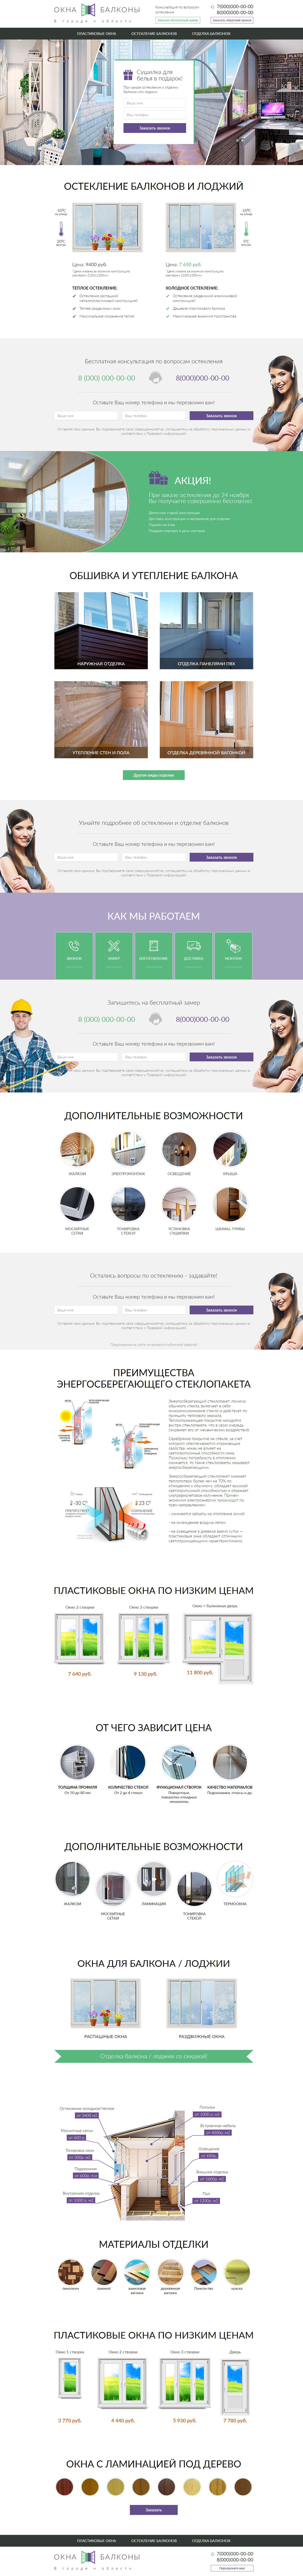 Landing page - Glazing of balconies and loggias